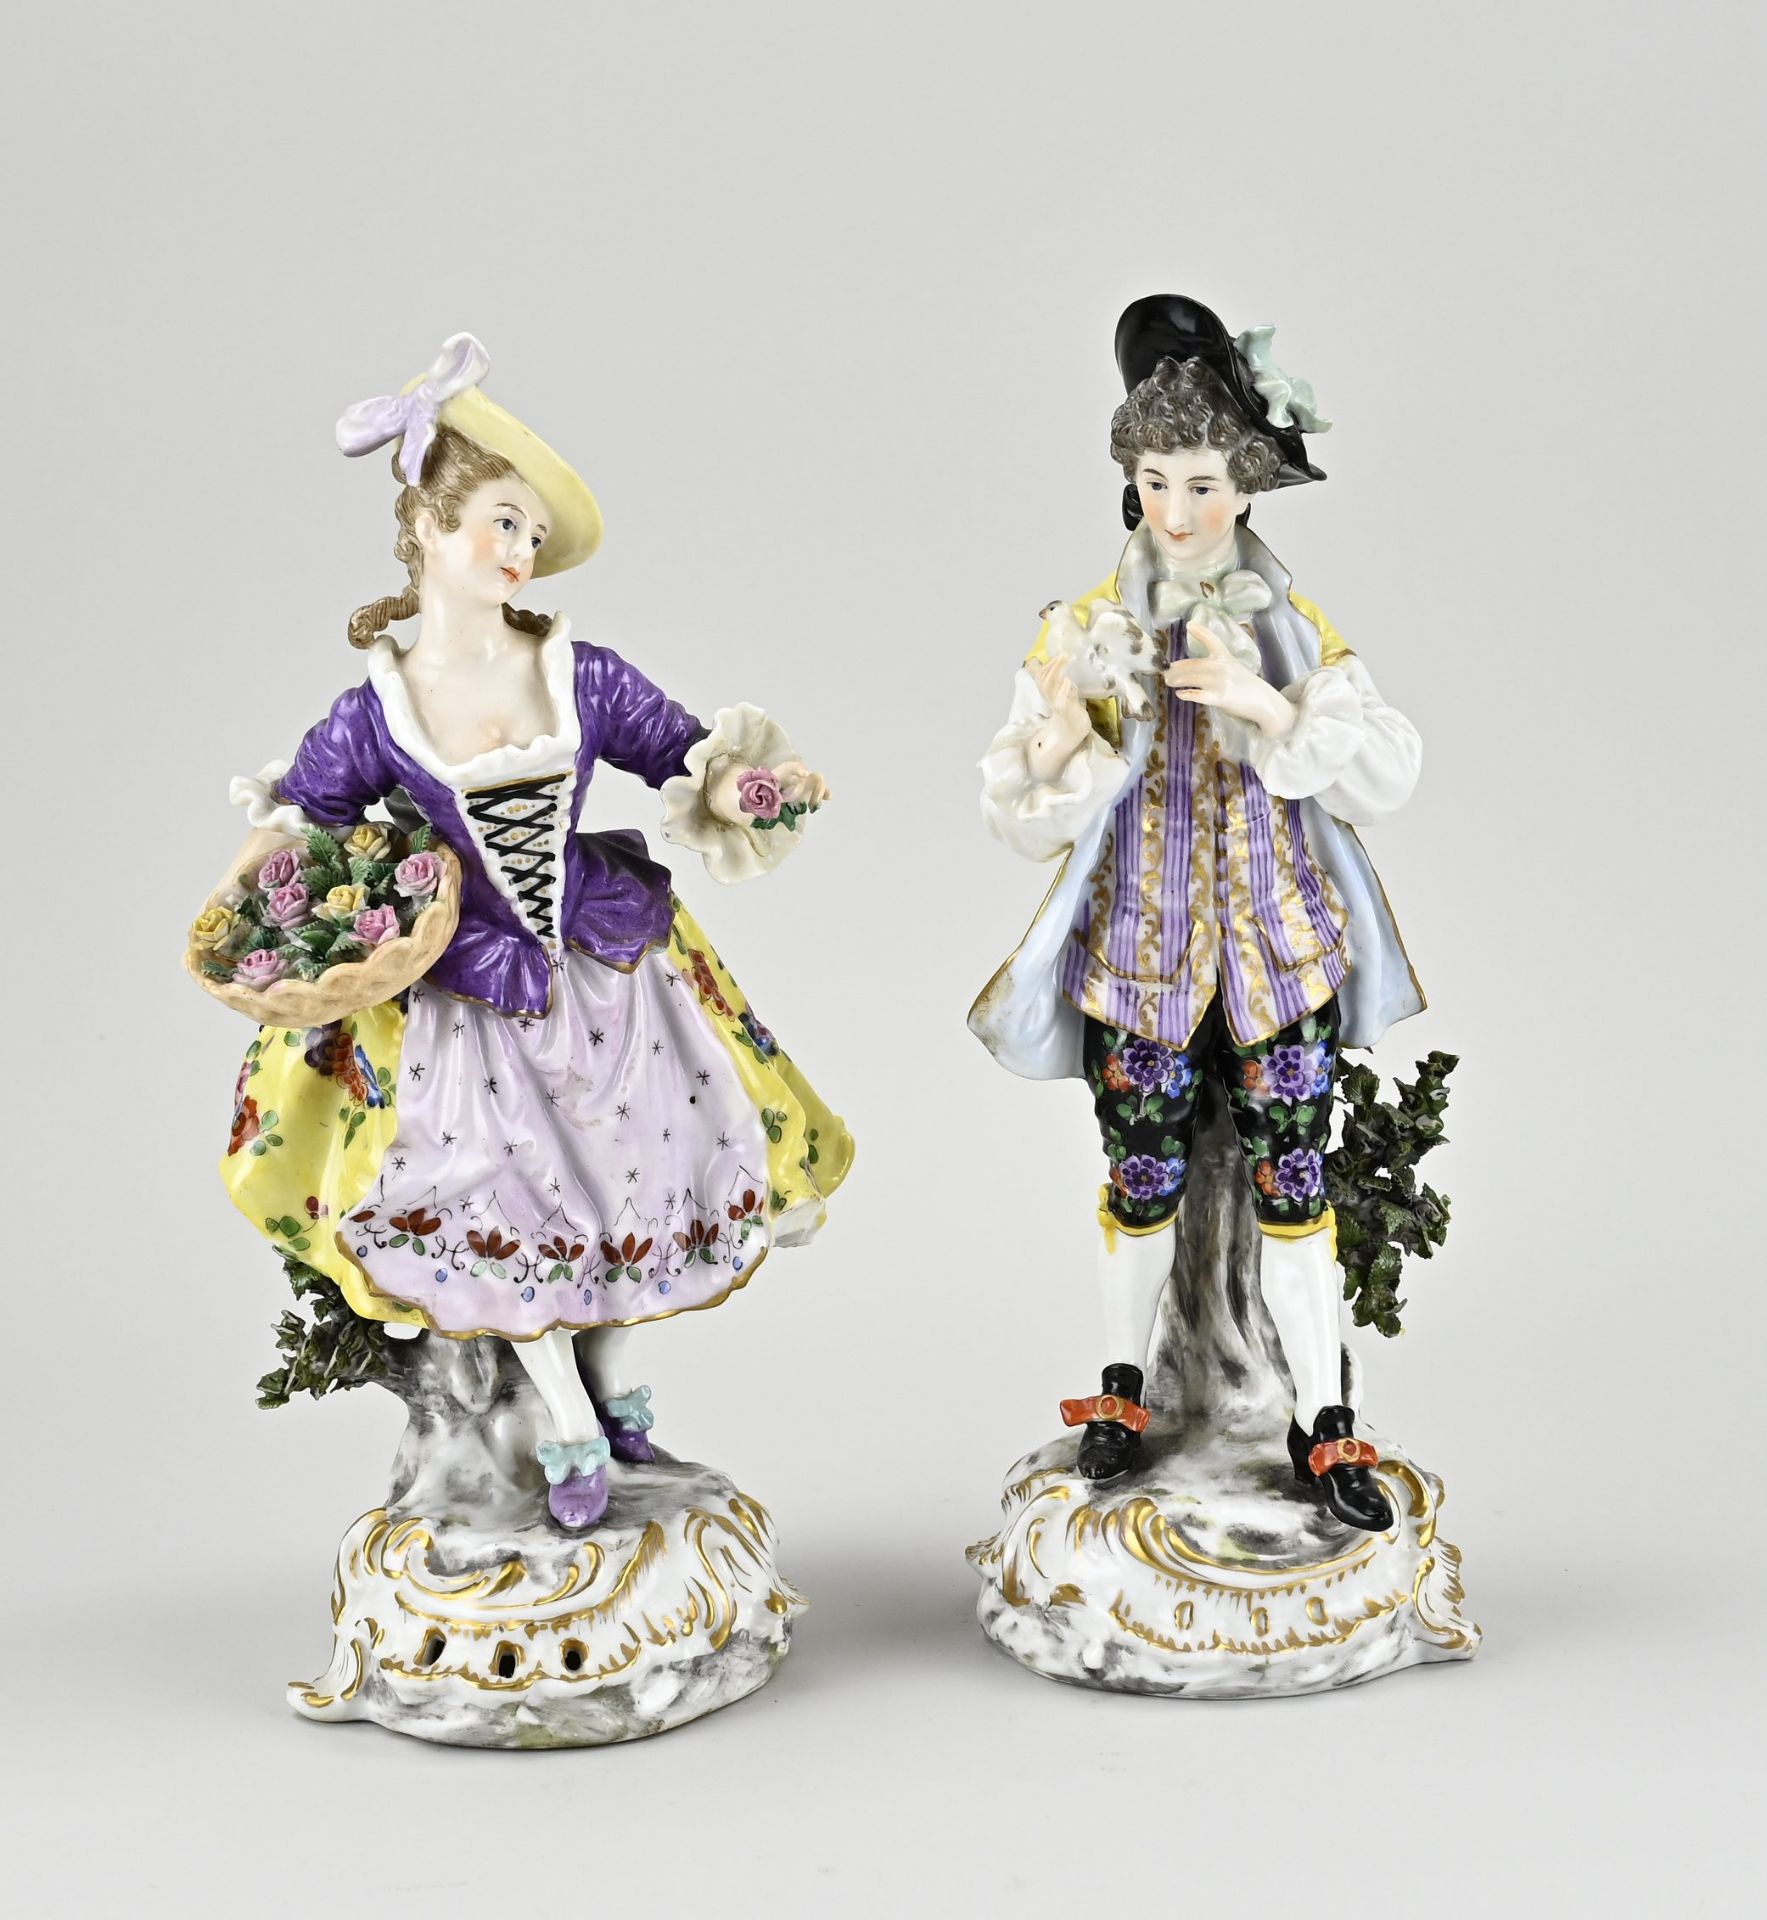 Two porcelain statues